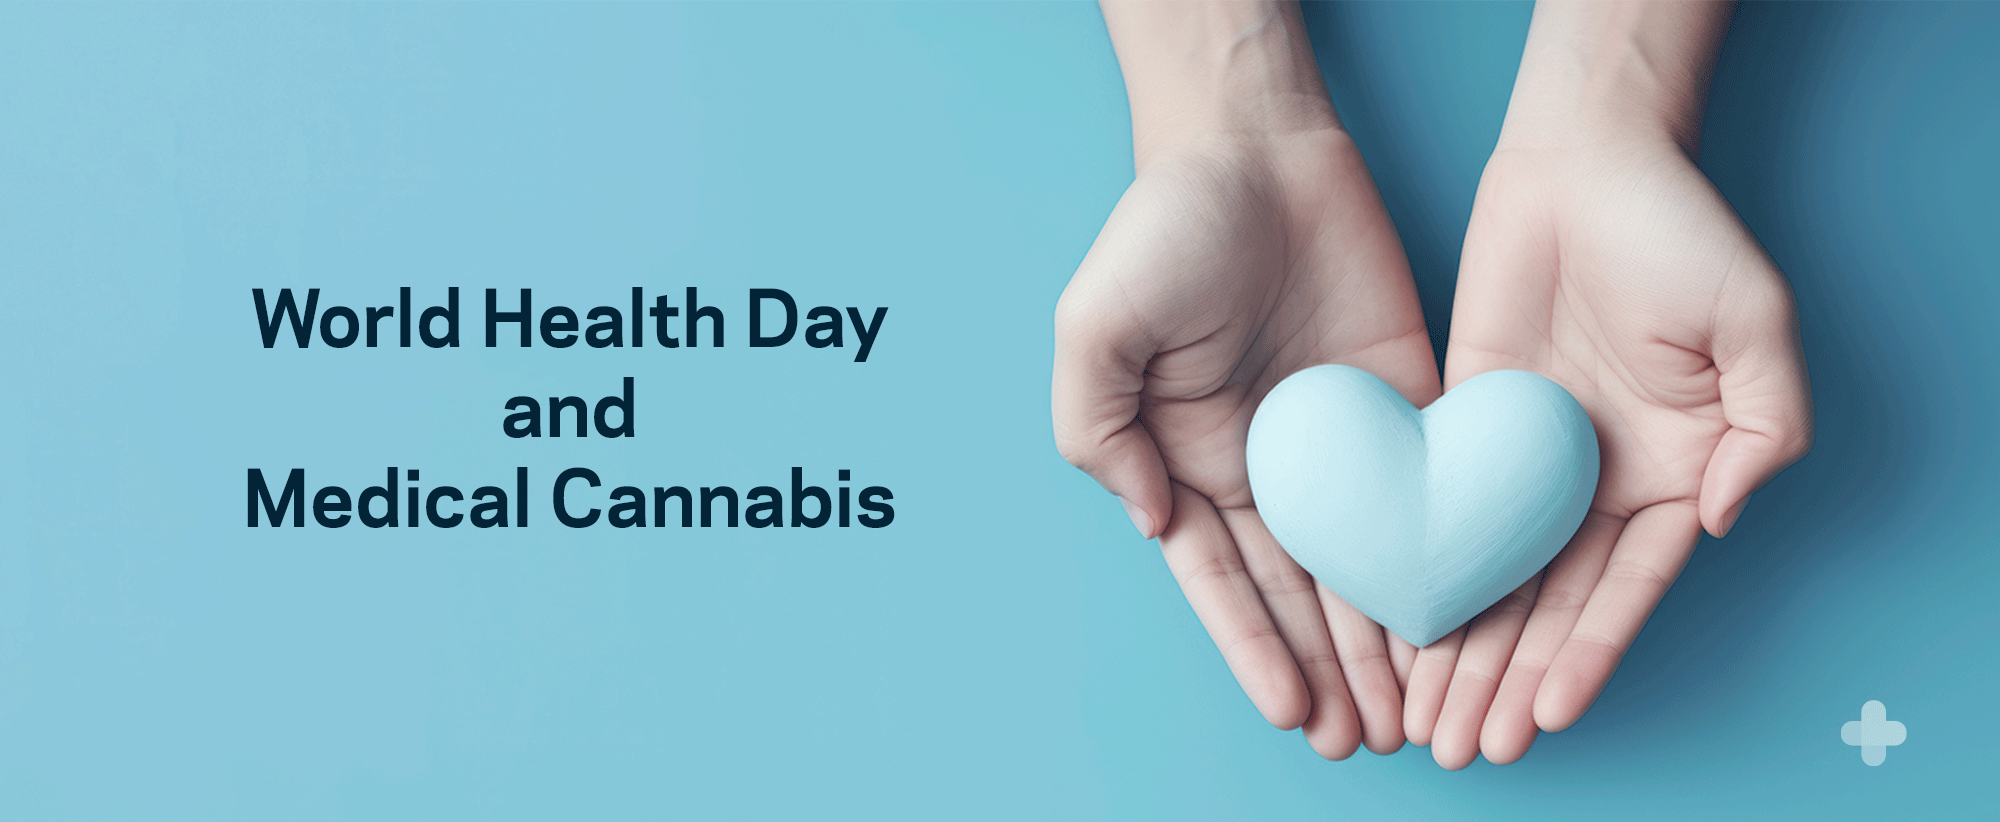 World Health Day and Medical Cannabis